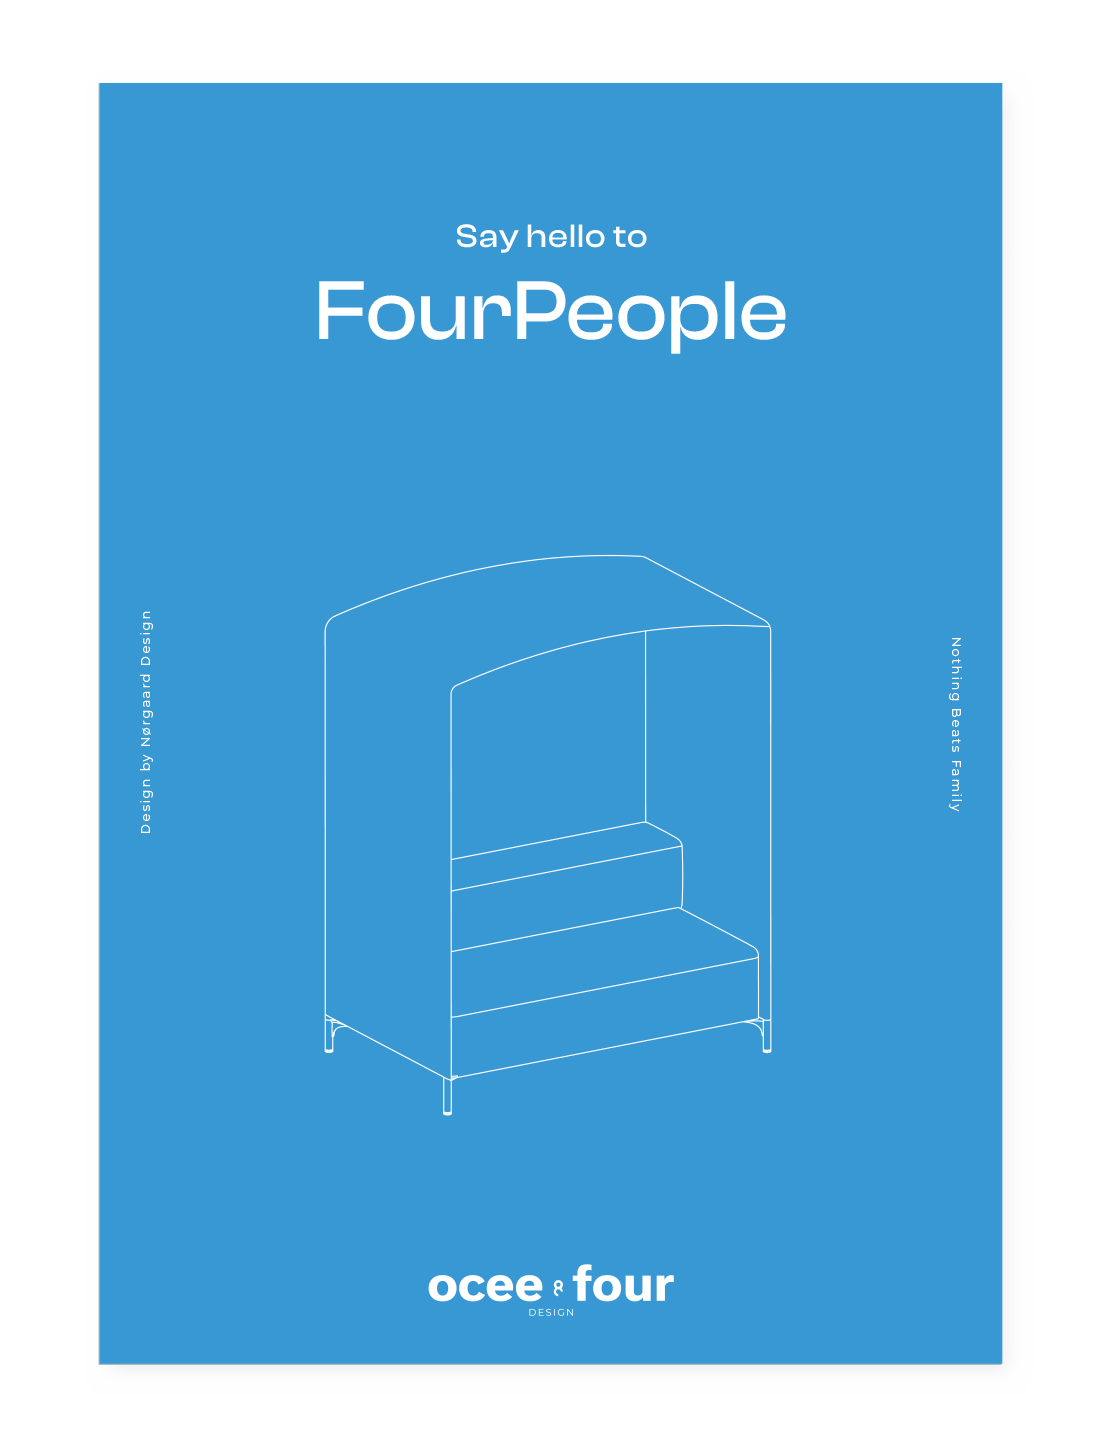 Say hello to FourPeople